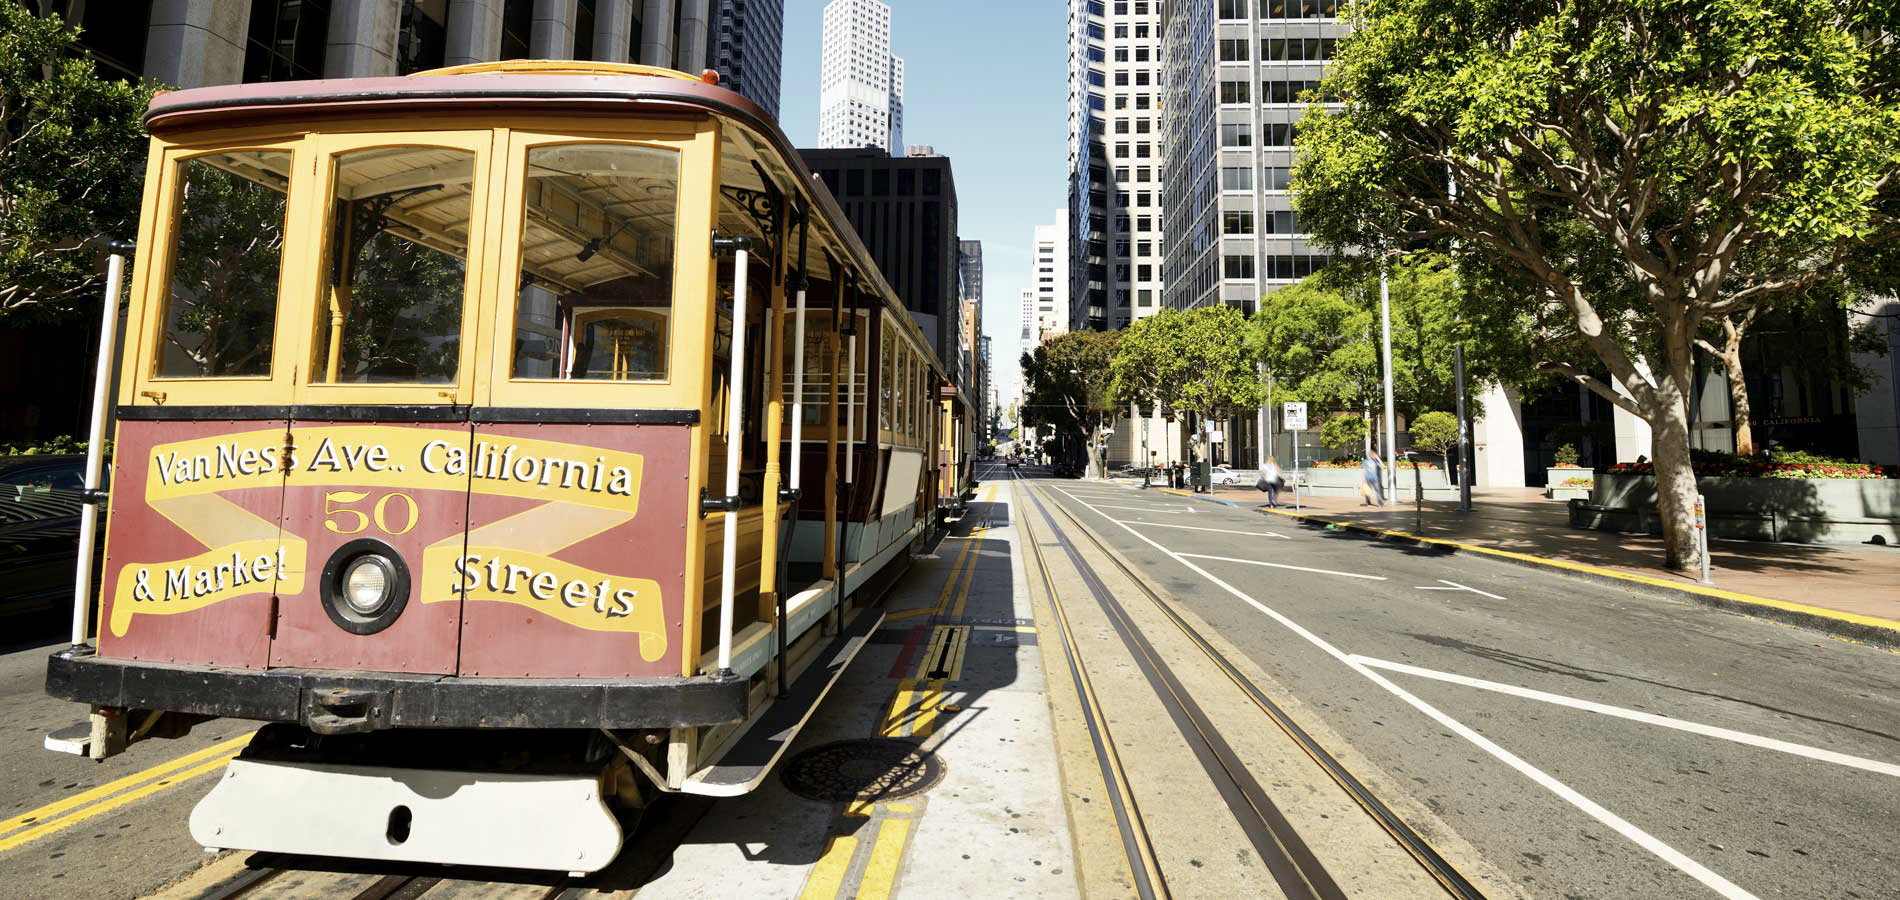 Hop On and Off the Famed Cable Cars